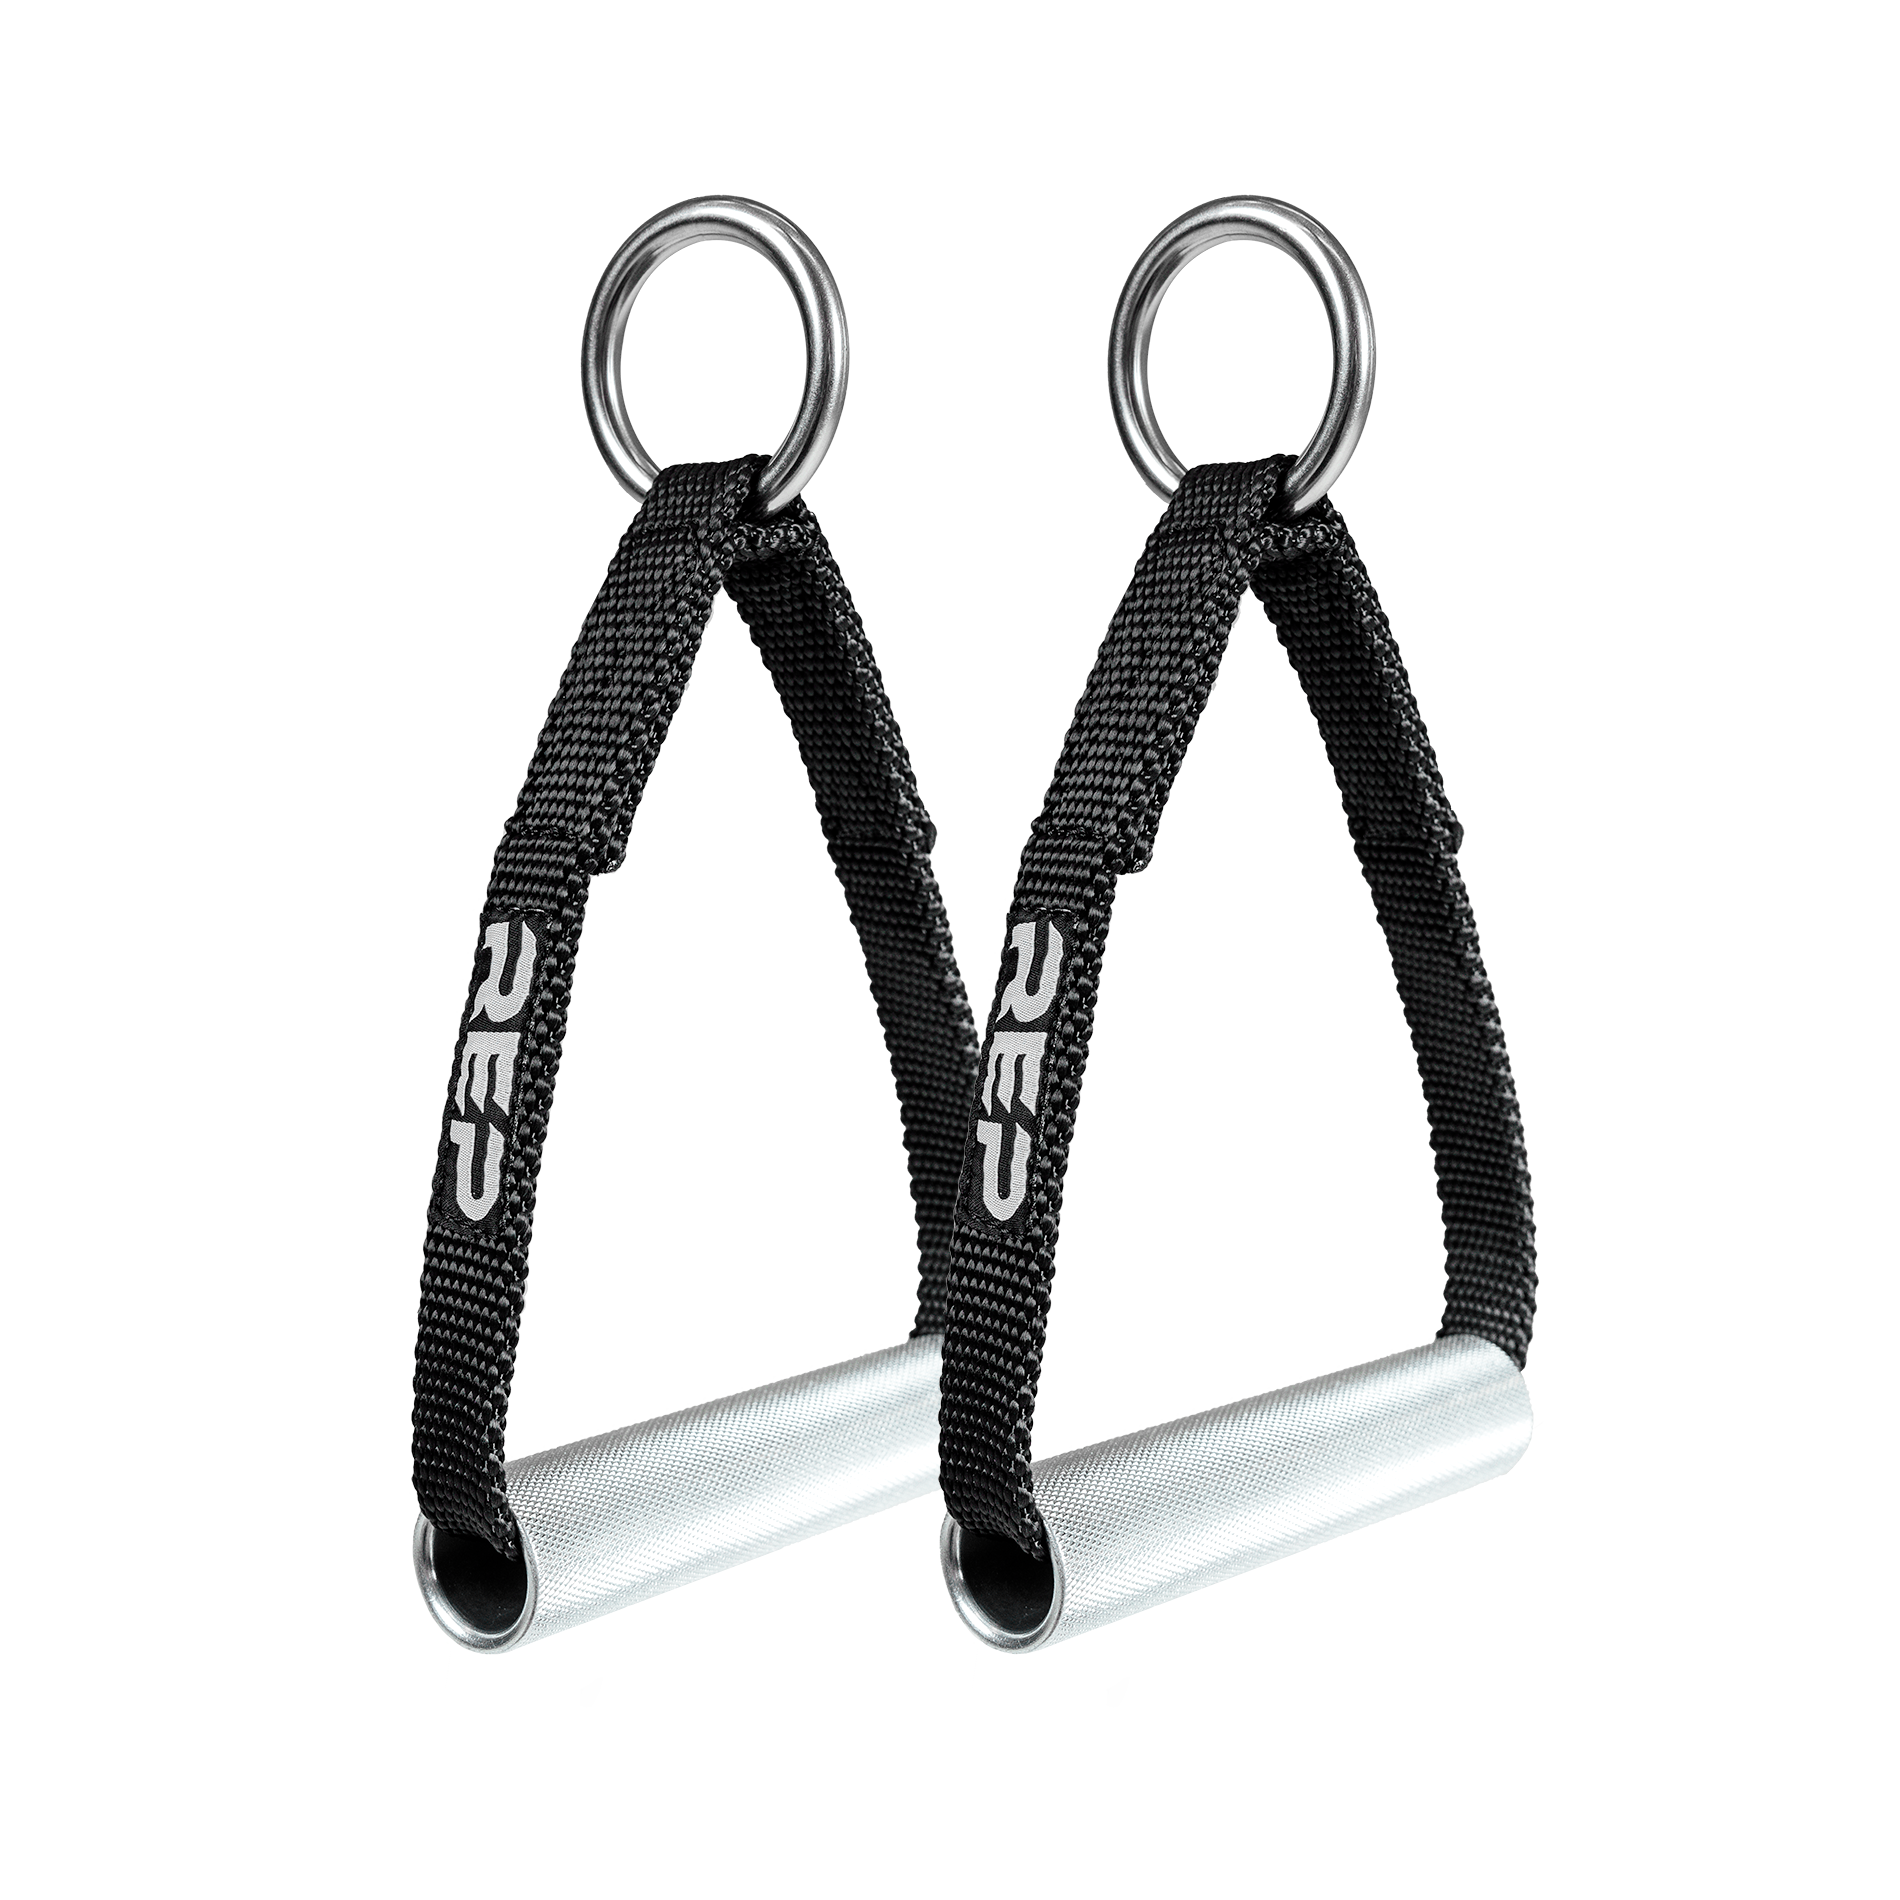 SPART Ergonomic Double D Handle and Heavy Duty Exercise Handles